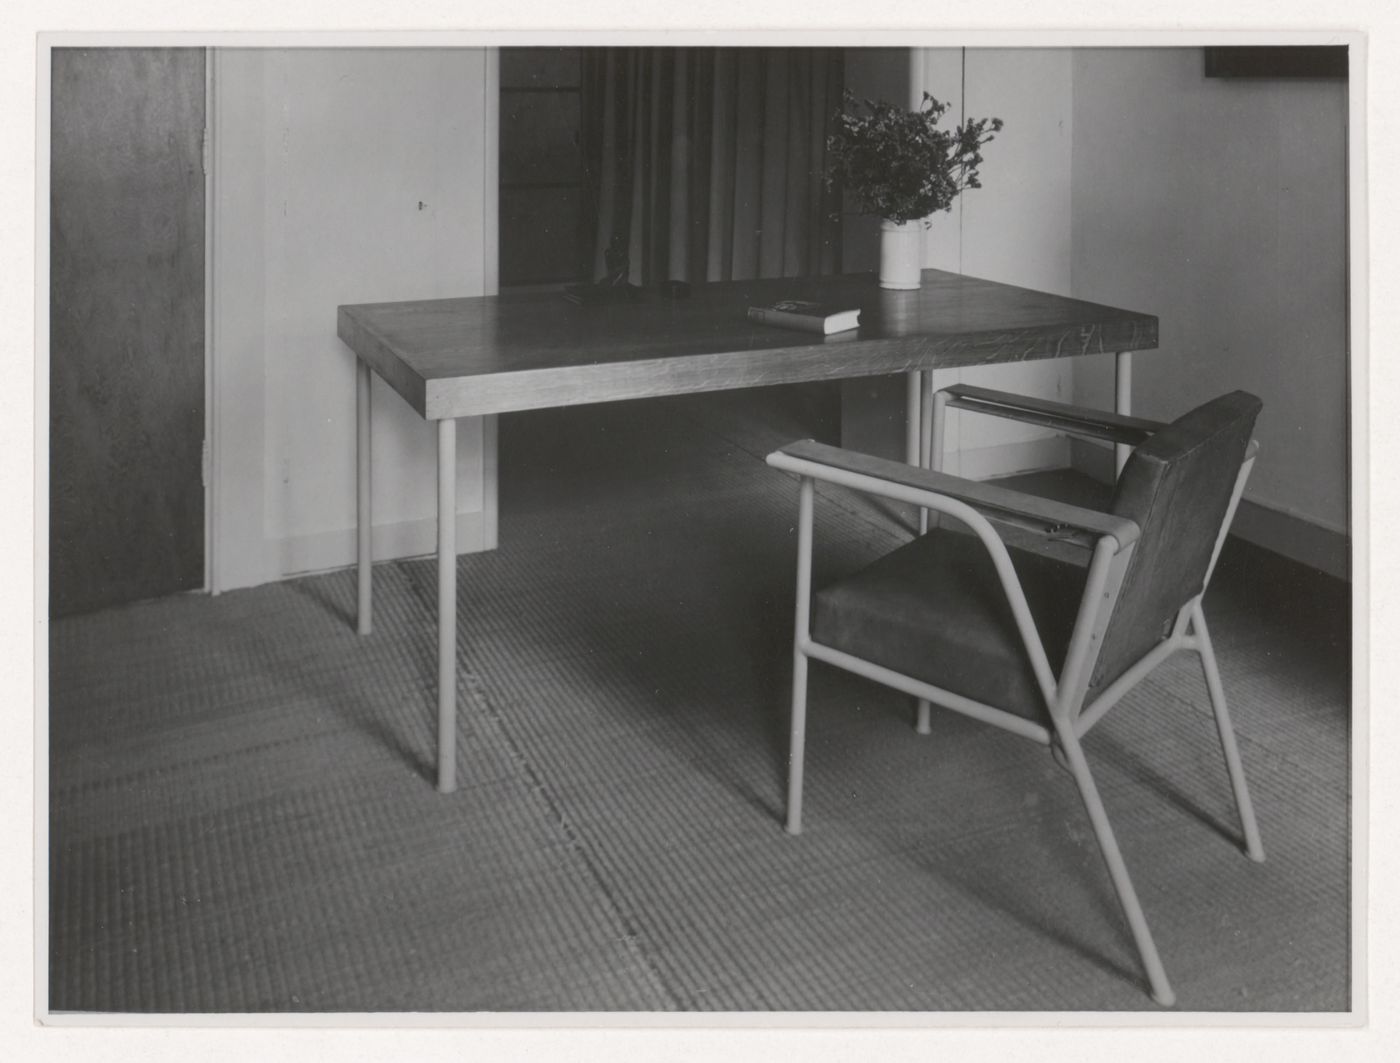 Interior view of Hannema House I showing a table and armchair designed by J.J.P. Oud, Rotterdam, Netherlands